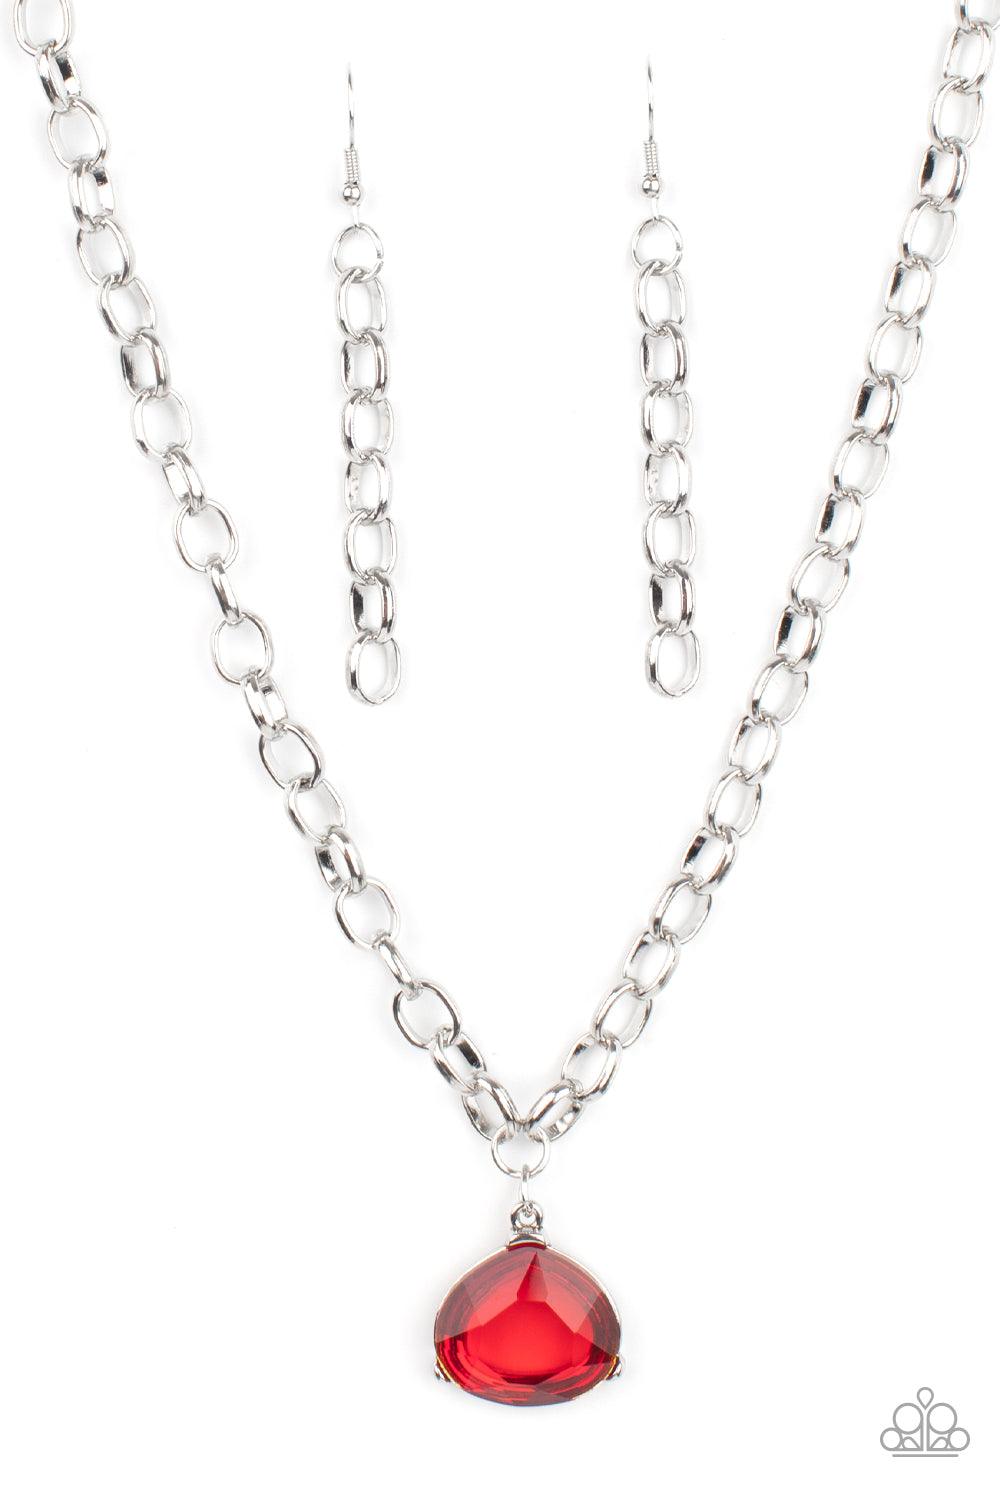 Paparazzi Accessories Gallery Gem - Red An oversized glassy red gem is pressed into a pronged silver fitting at the bottom of a chunky silver chain, creating a dramatic pendant below the collar. Features an adjustable clasp closure. Sold as one individual